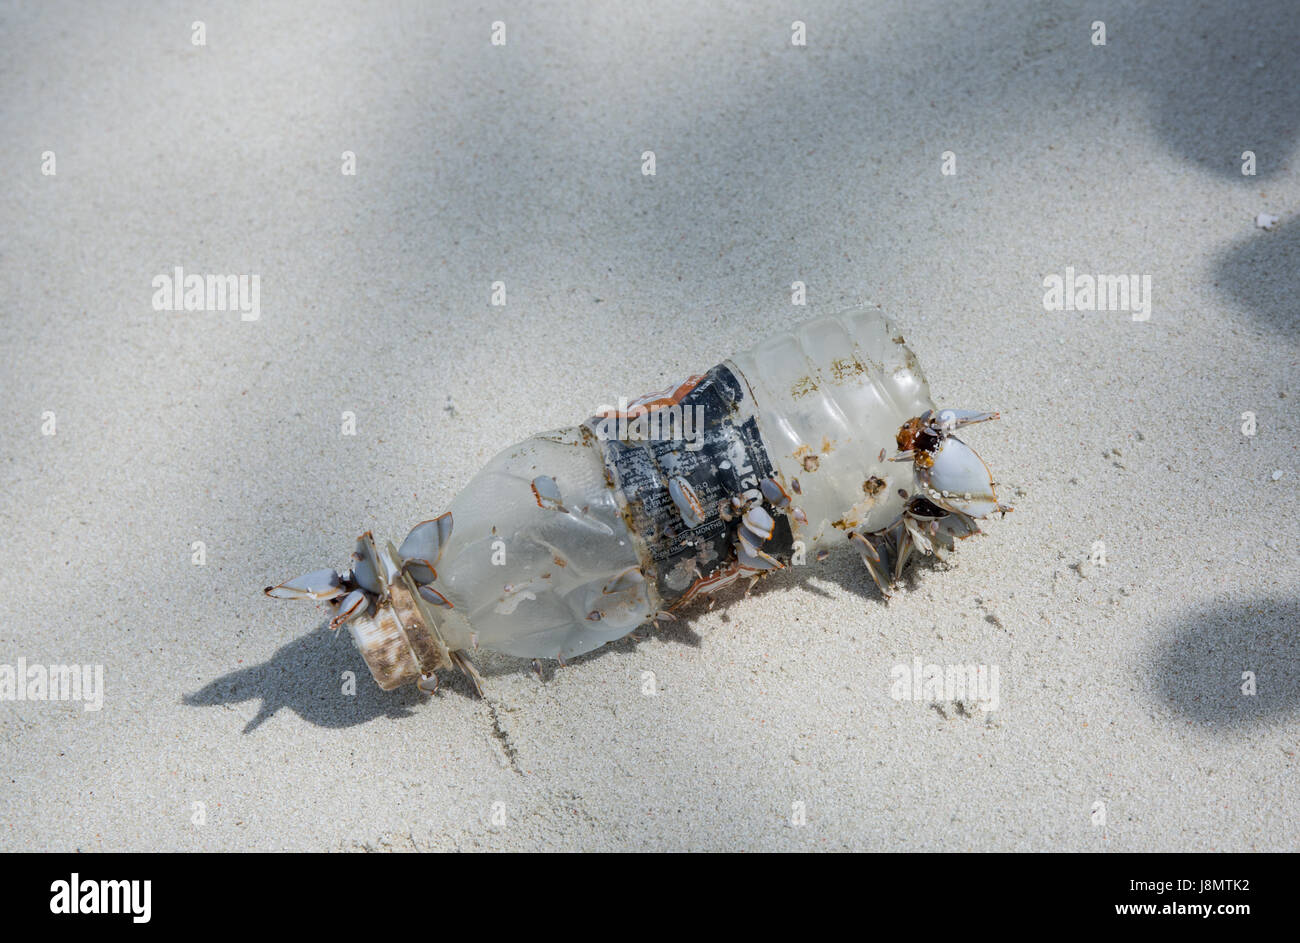 Plastics pollution, Maldives, Indian Ocean. 29th May 2017. Muscles growing on a plastic bottle in the Indian Ocean. Stock Photo